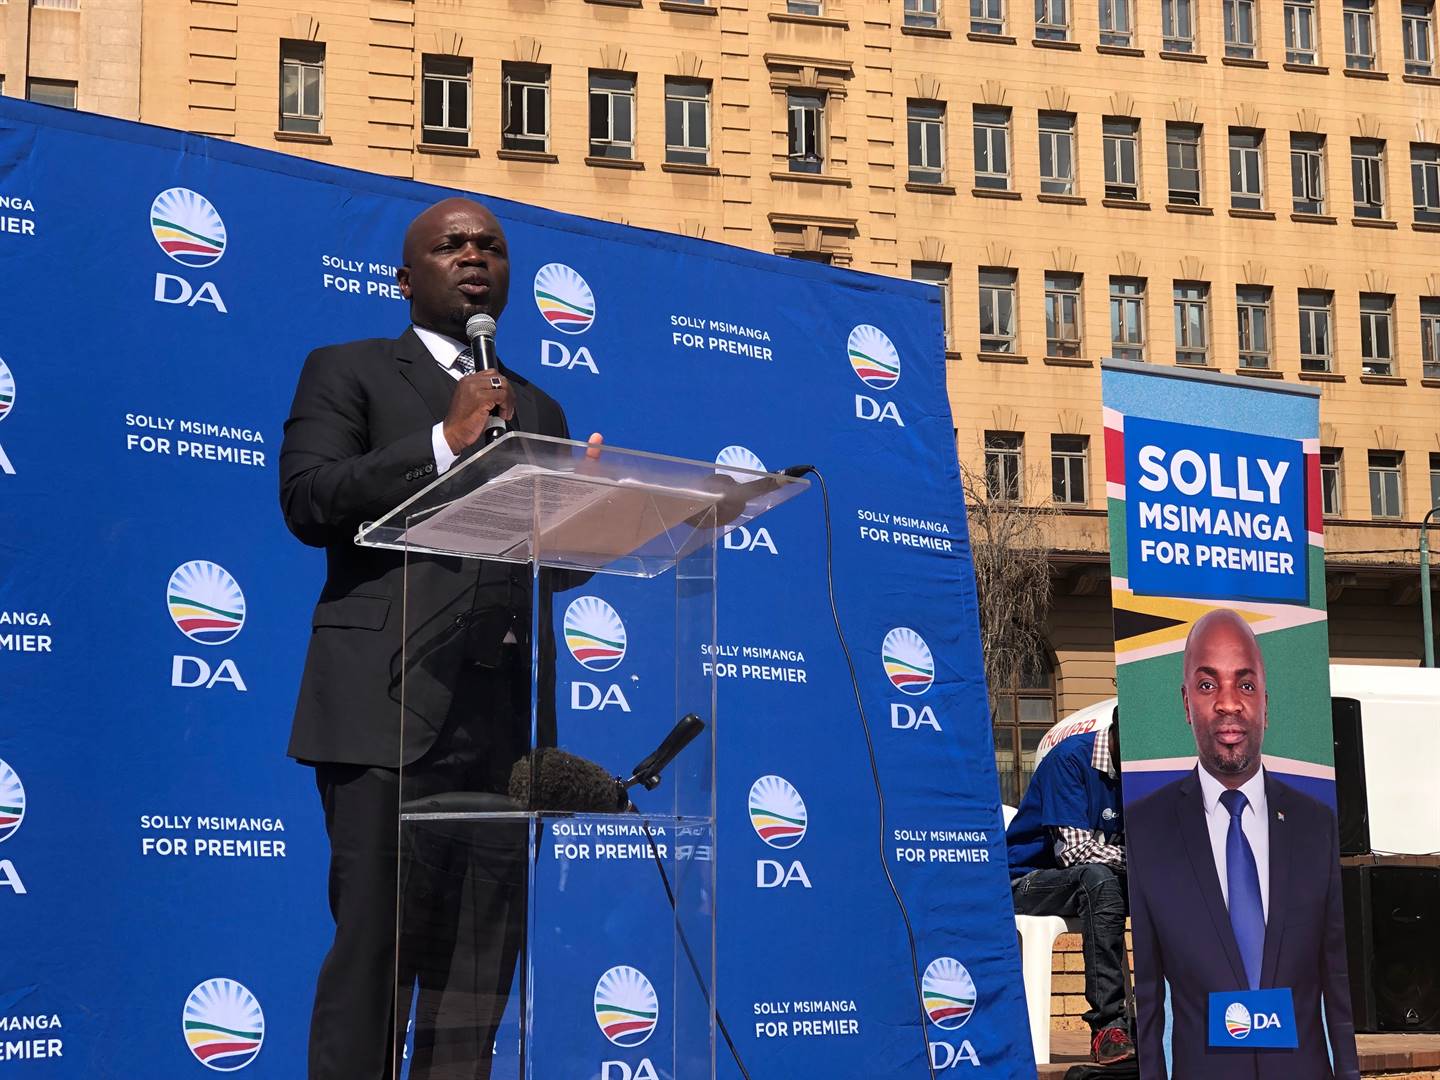 The DA’s Gauteng premier candidate Solly Msimanga announcing the action plan for his first 100 days in office at Beyers Naude Square on April 29. Picture: Juniour Khumalo